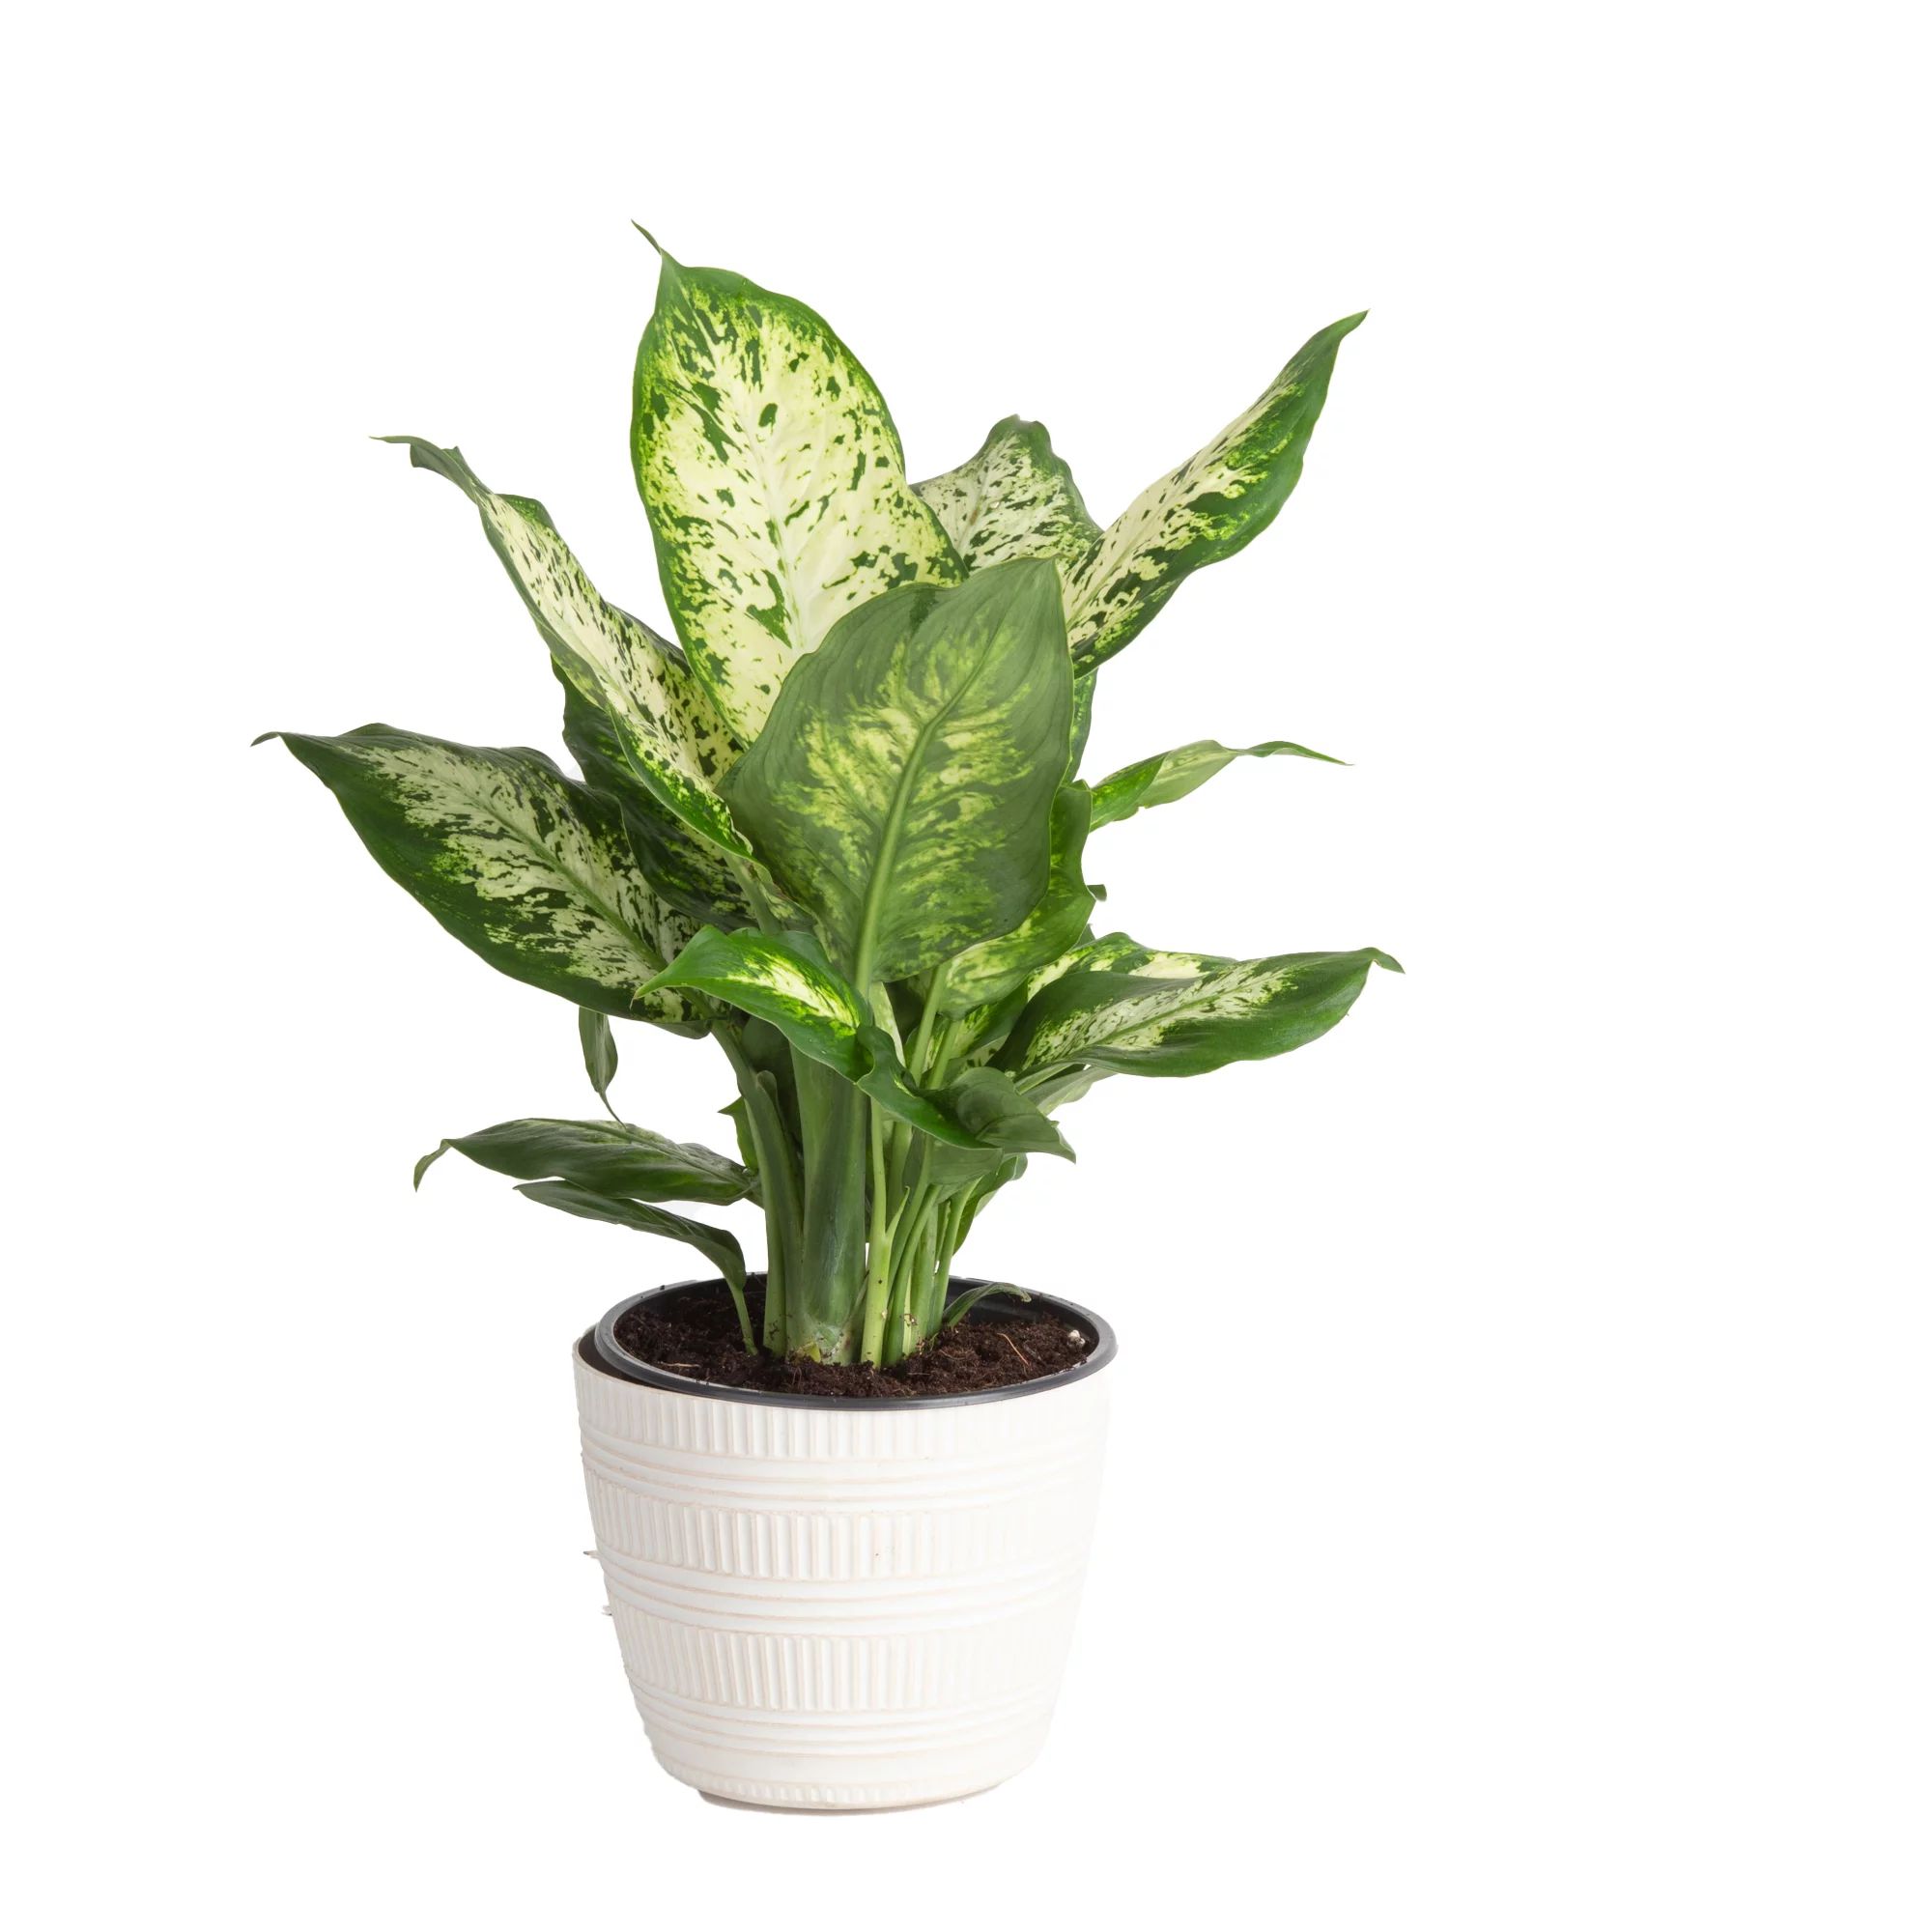 Plants with Benefits Live Green Dieffenbachia Plant in 10in. Grower Pot | Walmart (US)